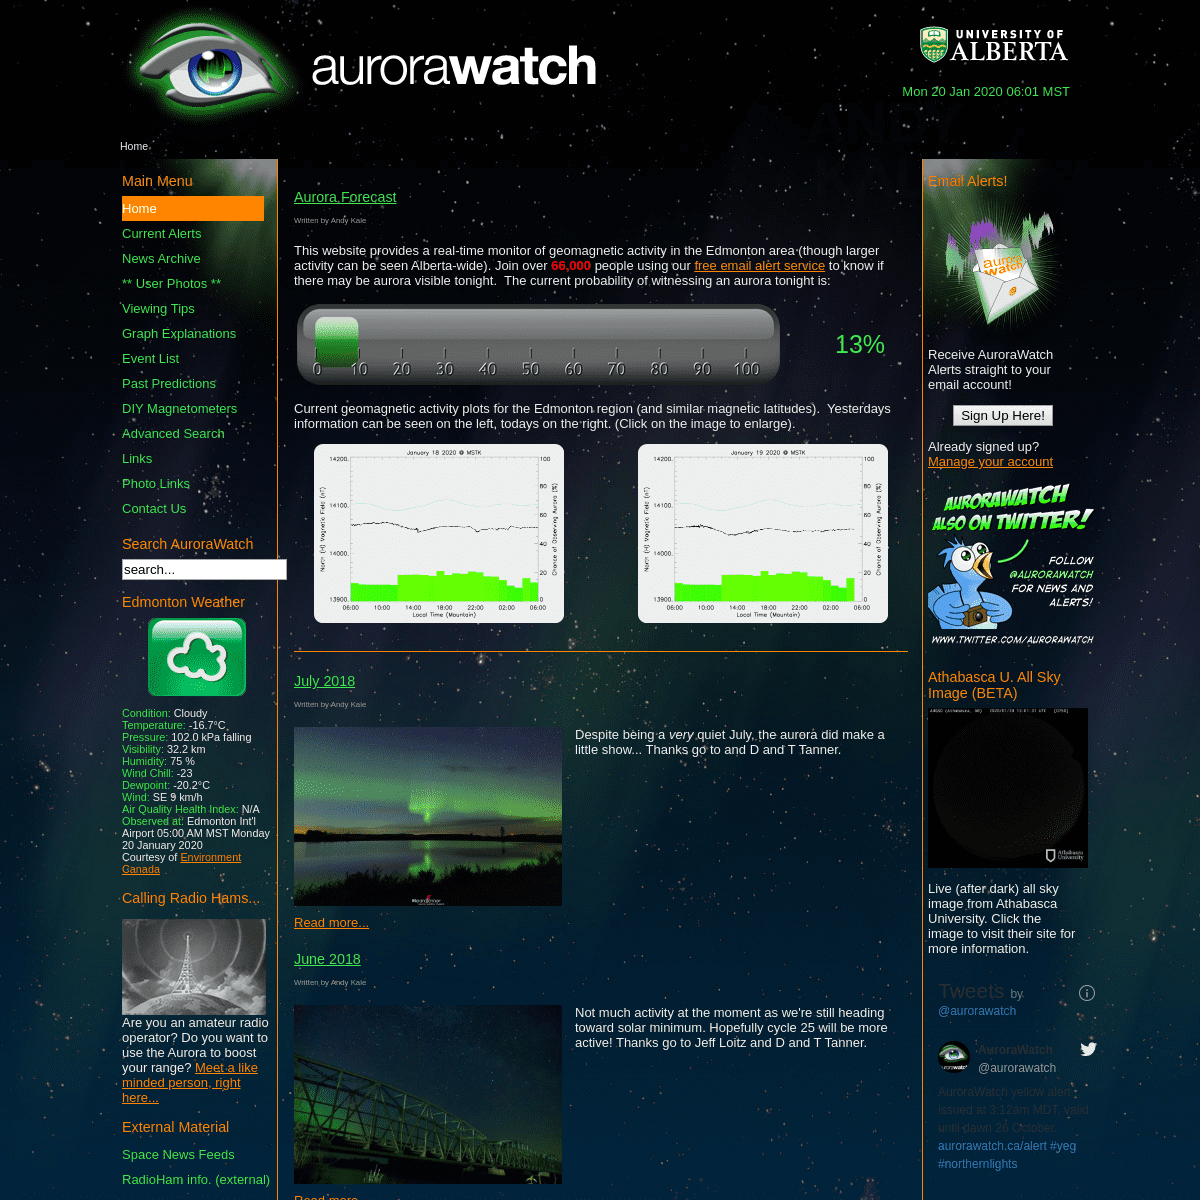 A complete backup of aurorawatch.ca